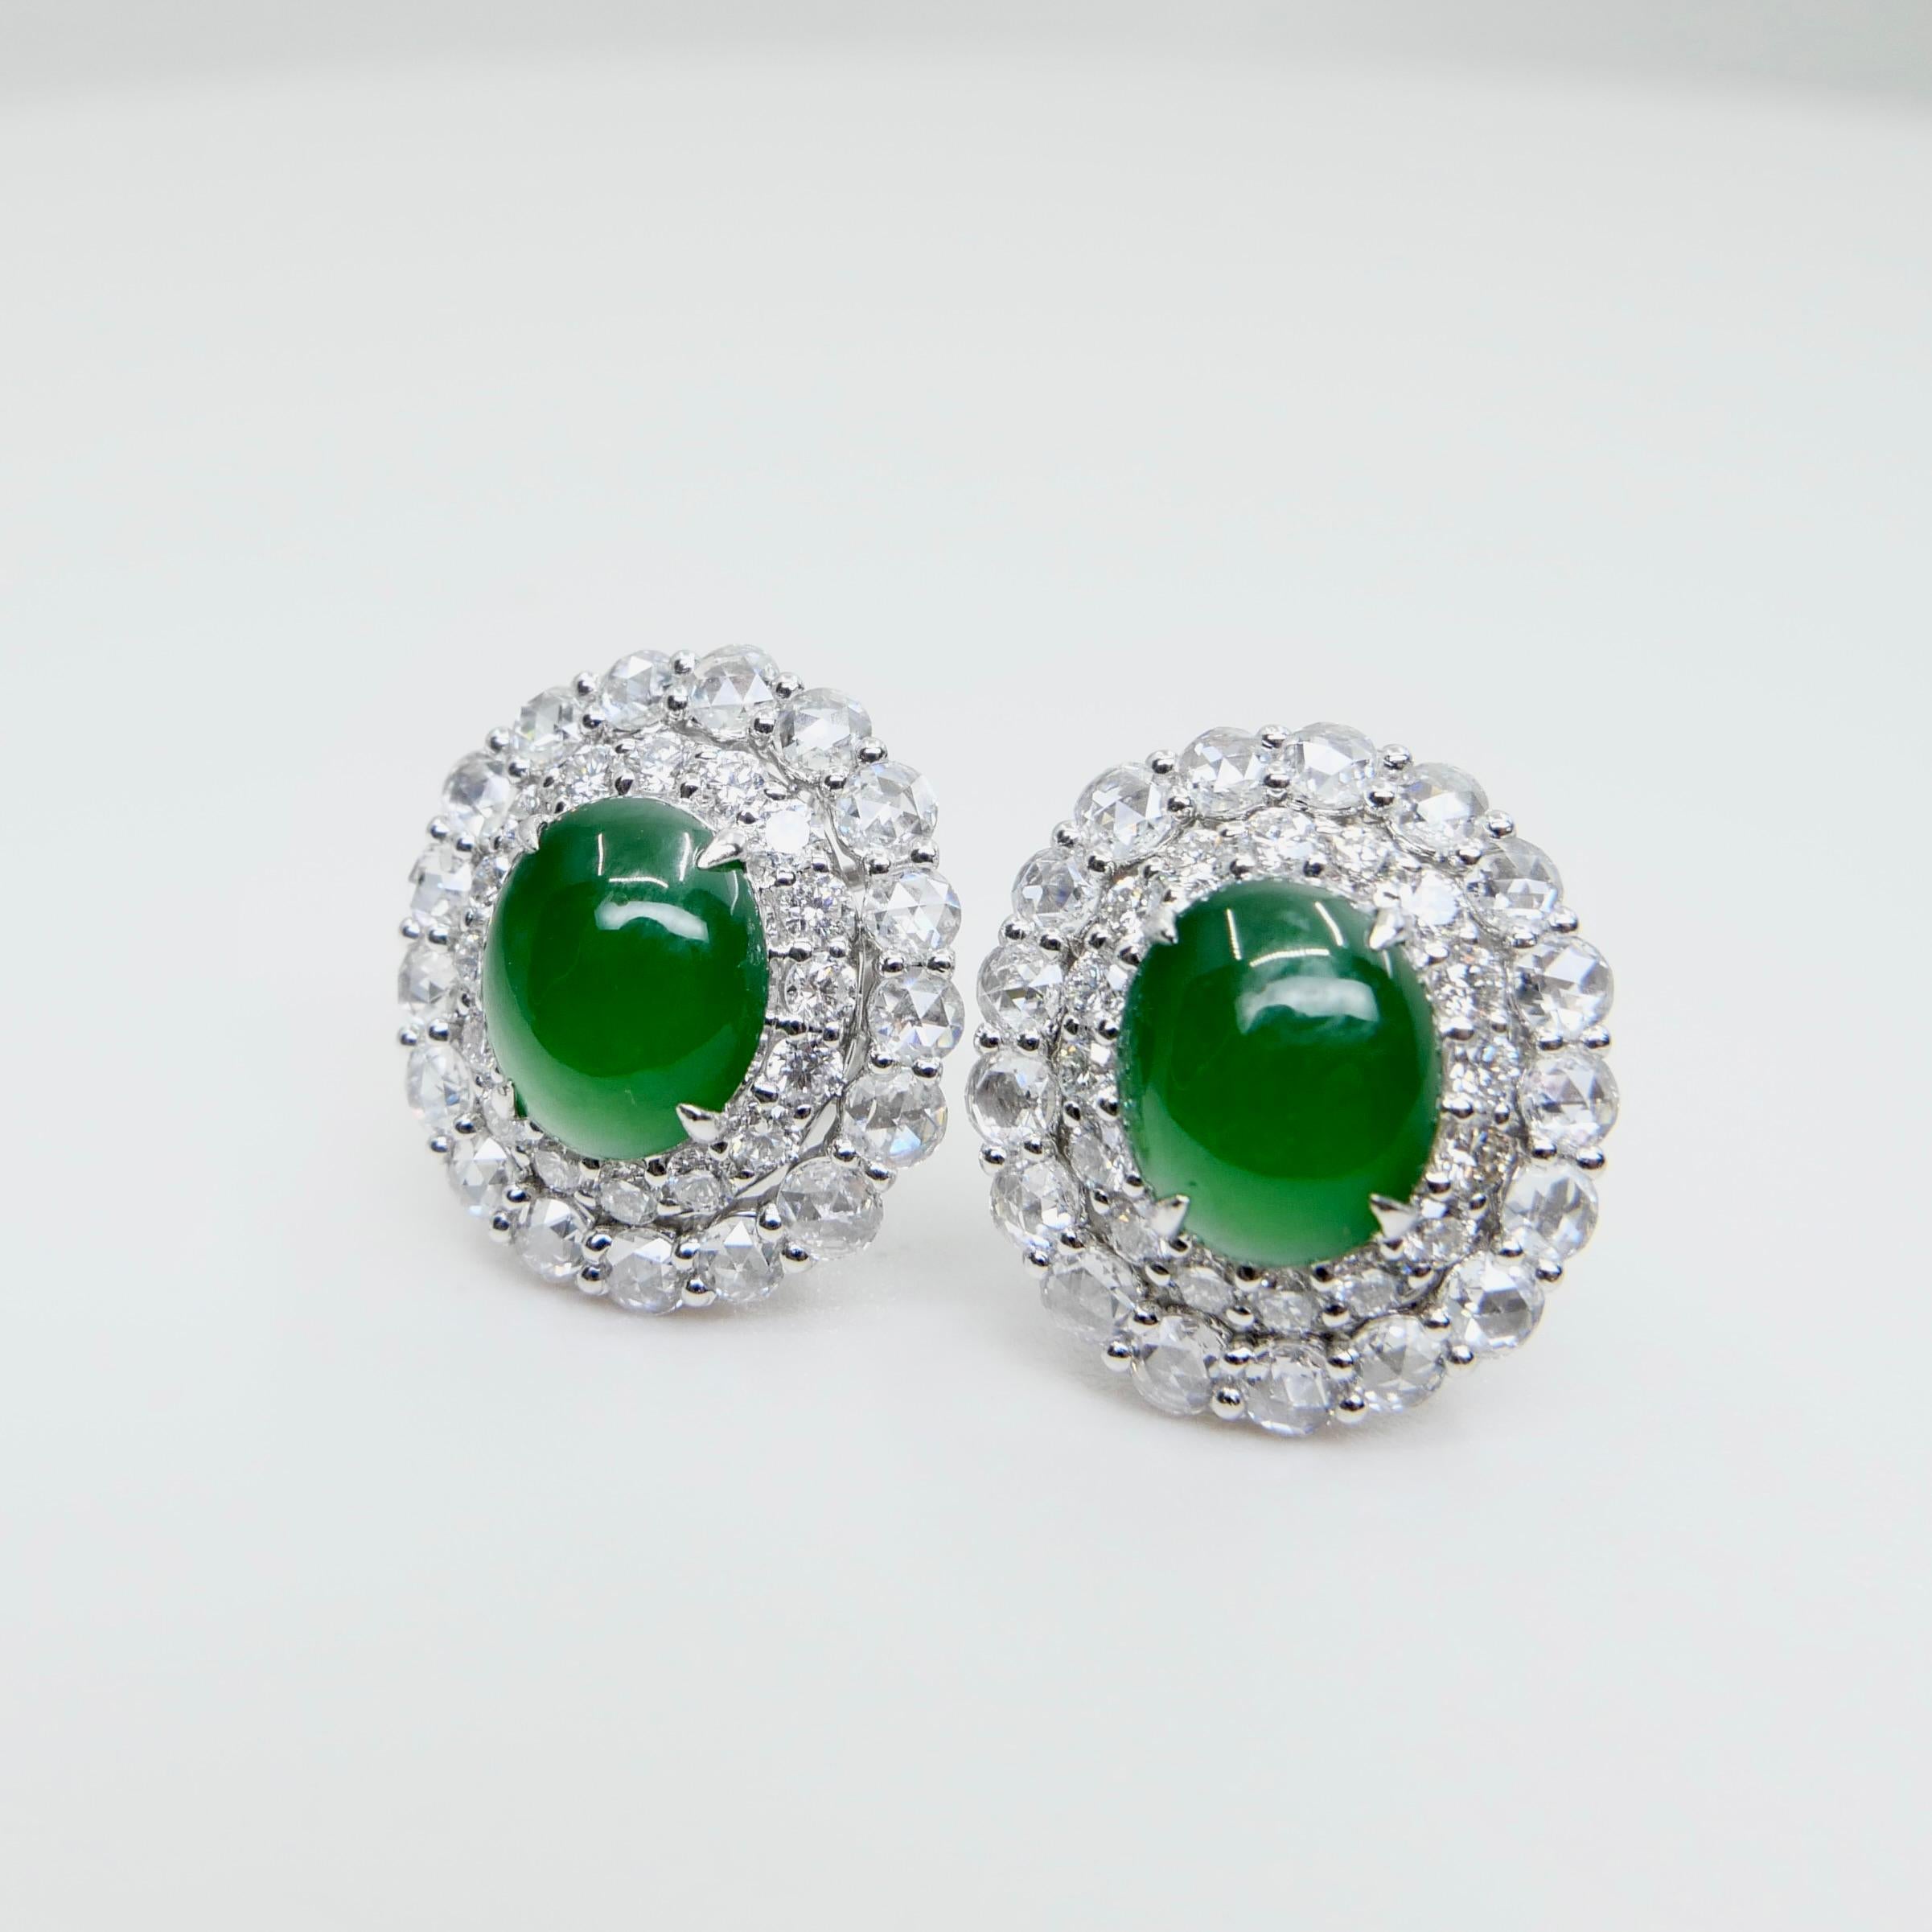 Cabochon Certified Natural Imperial Jade Diamond Stud Earrings. Best Glowing Green  For Sale